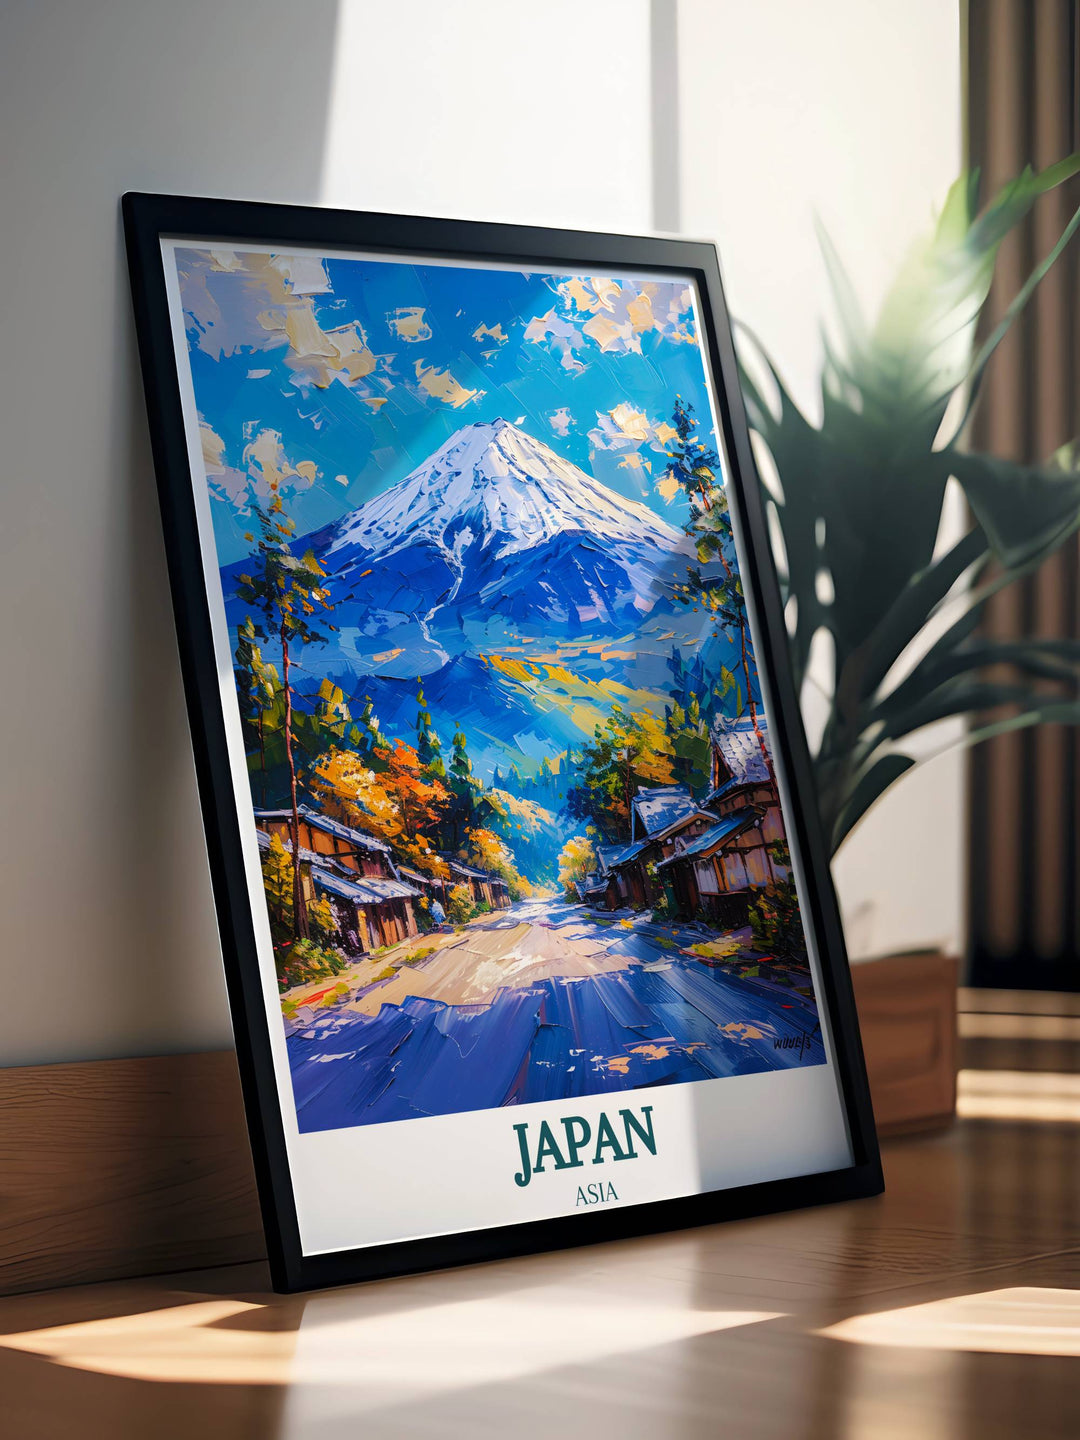 Art lovers will appreciate this Japan travel print of Mount Fuji, perfect for Tokyo art lover gifts.